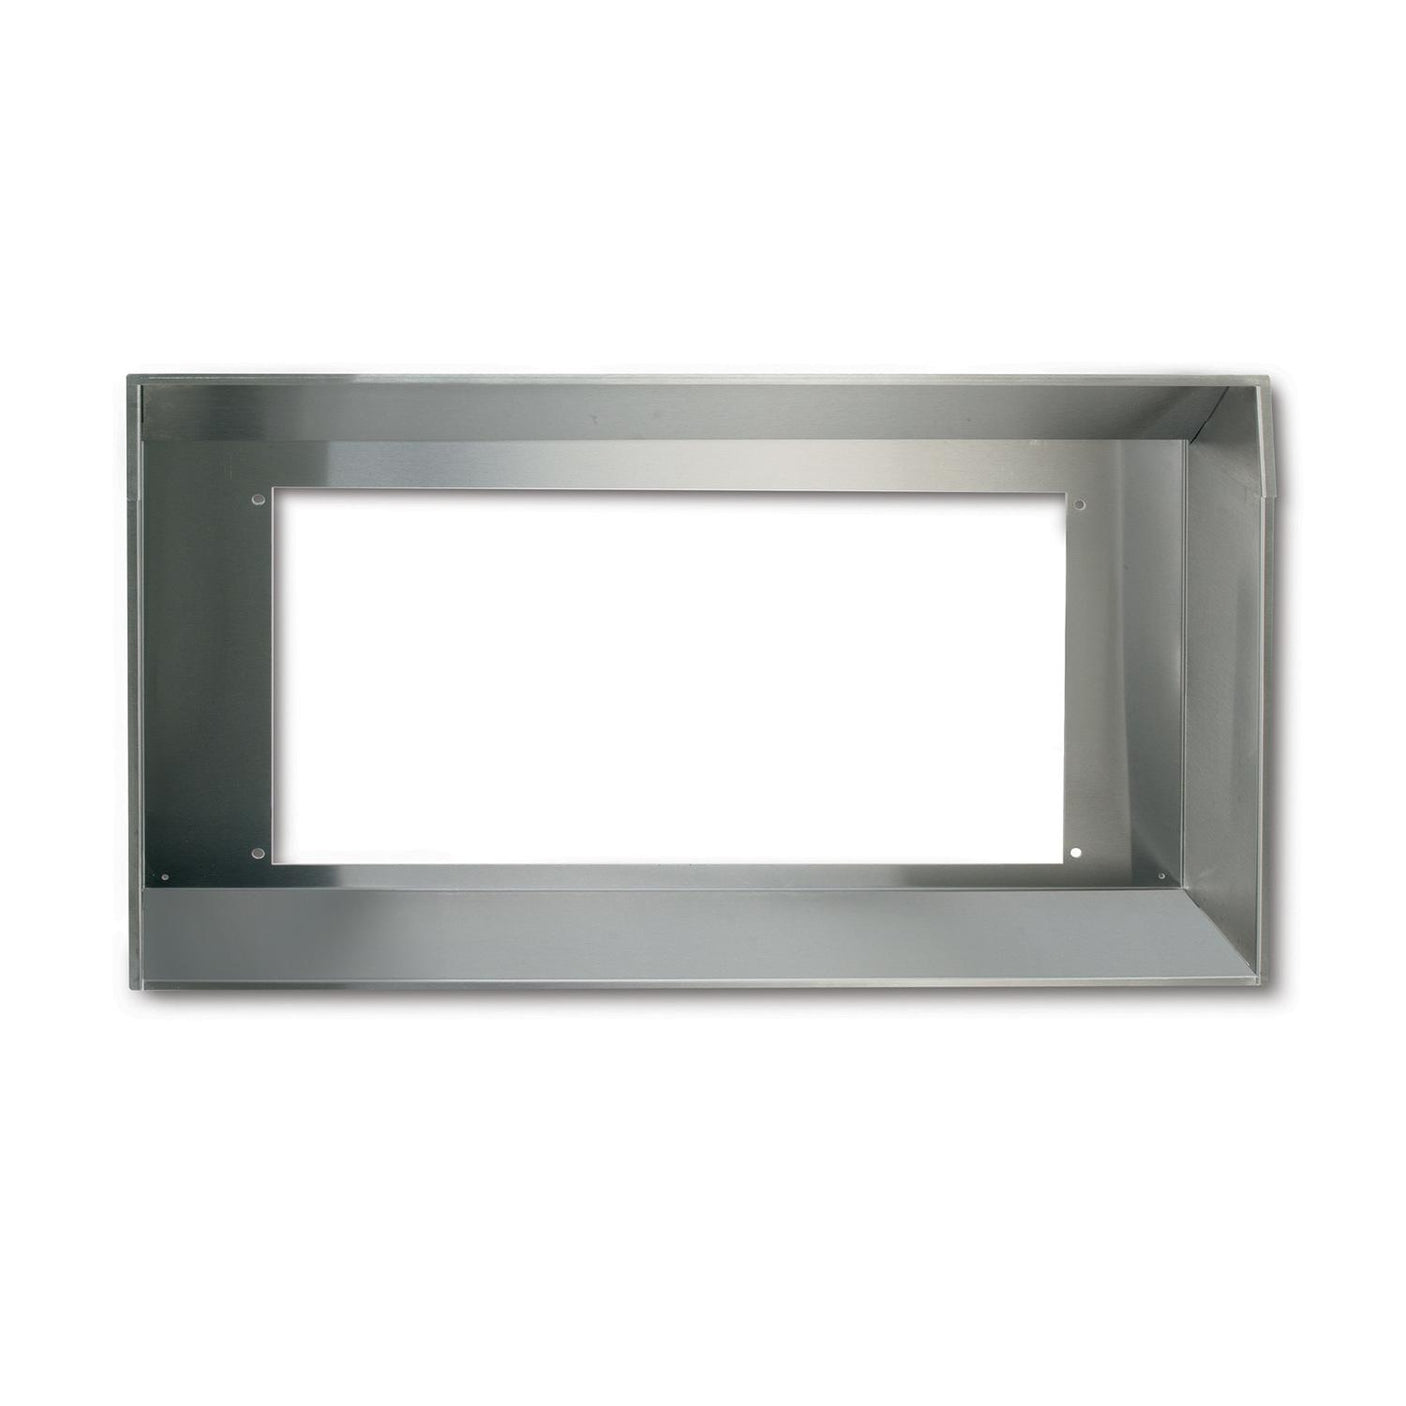 **DISCONTINUED** Broan® Elite 48-Inch wide Custom Hood Liner to fit RMP17004 or RMPE7004 Inserts, in Stainless Steel